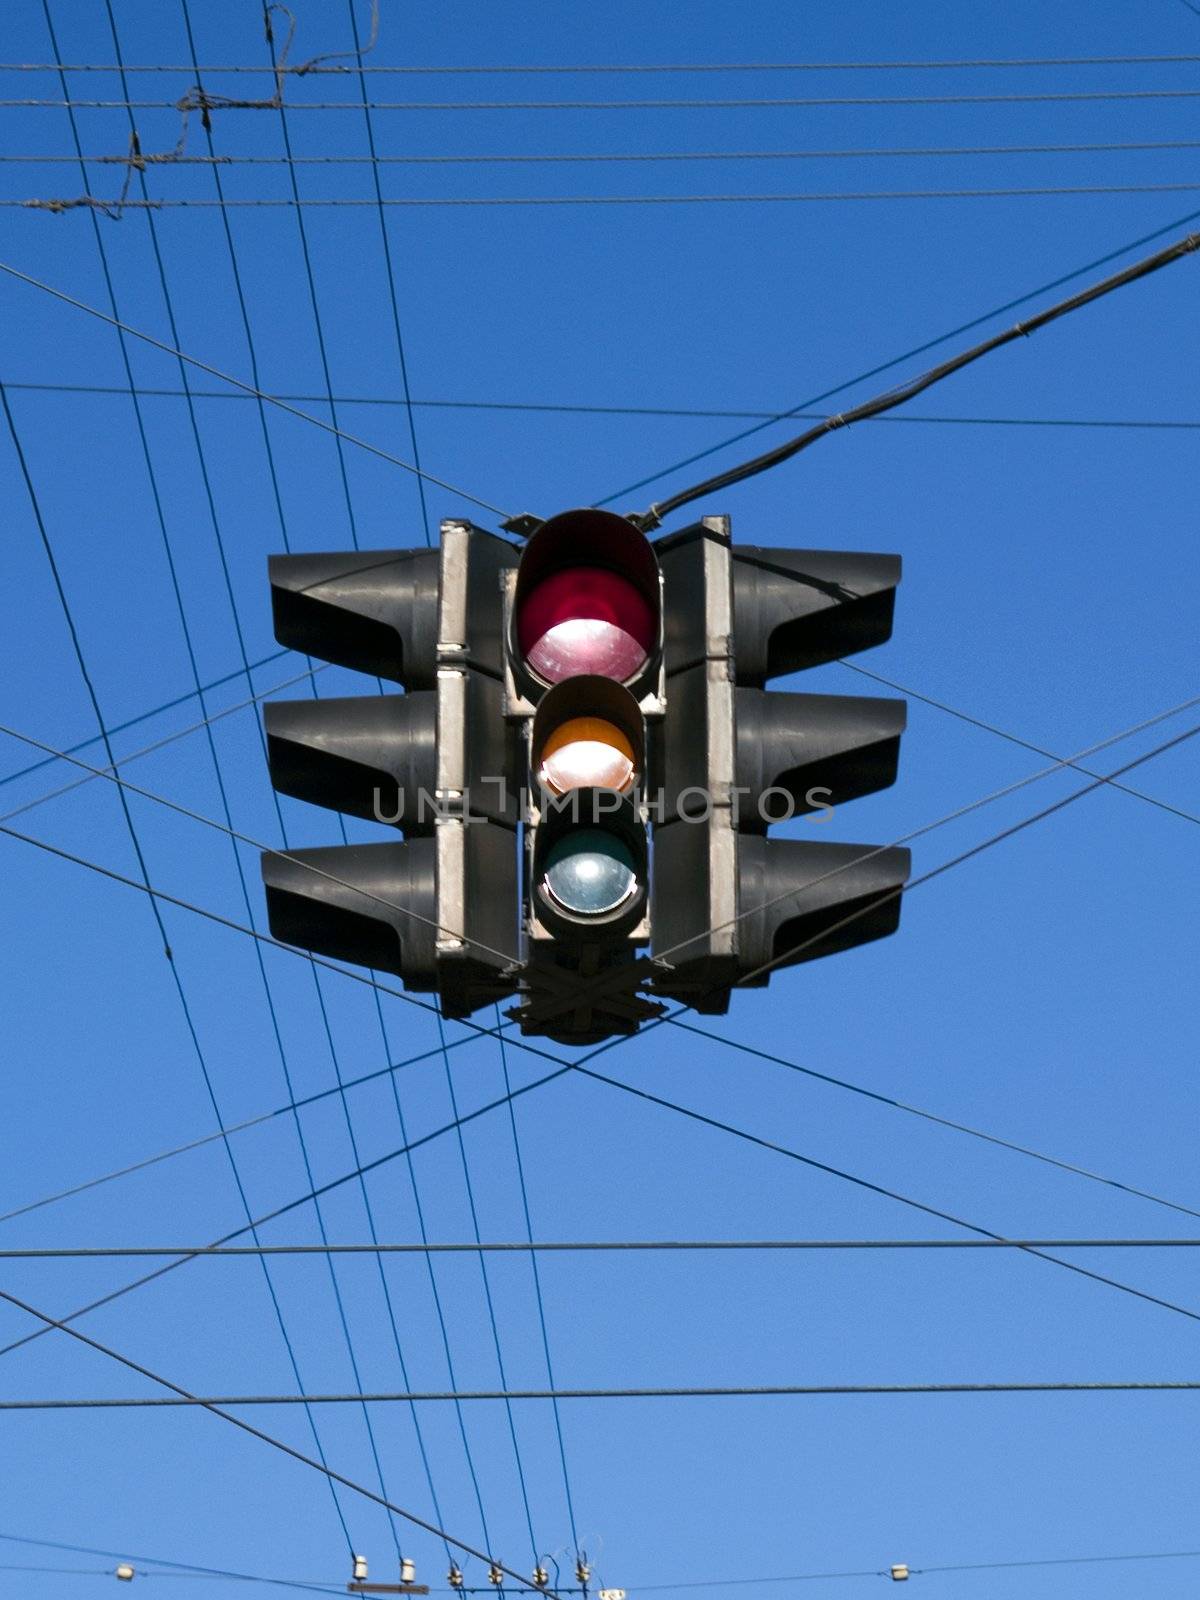 Stoplight with wires